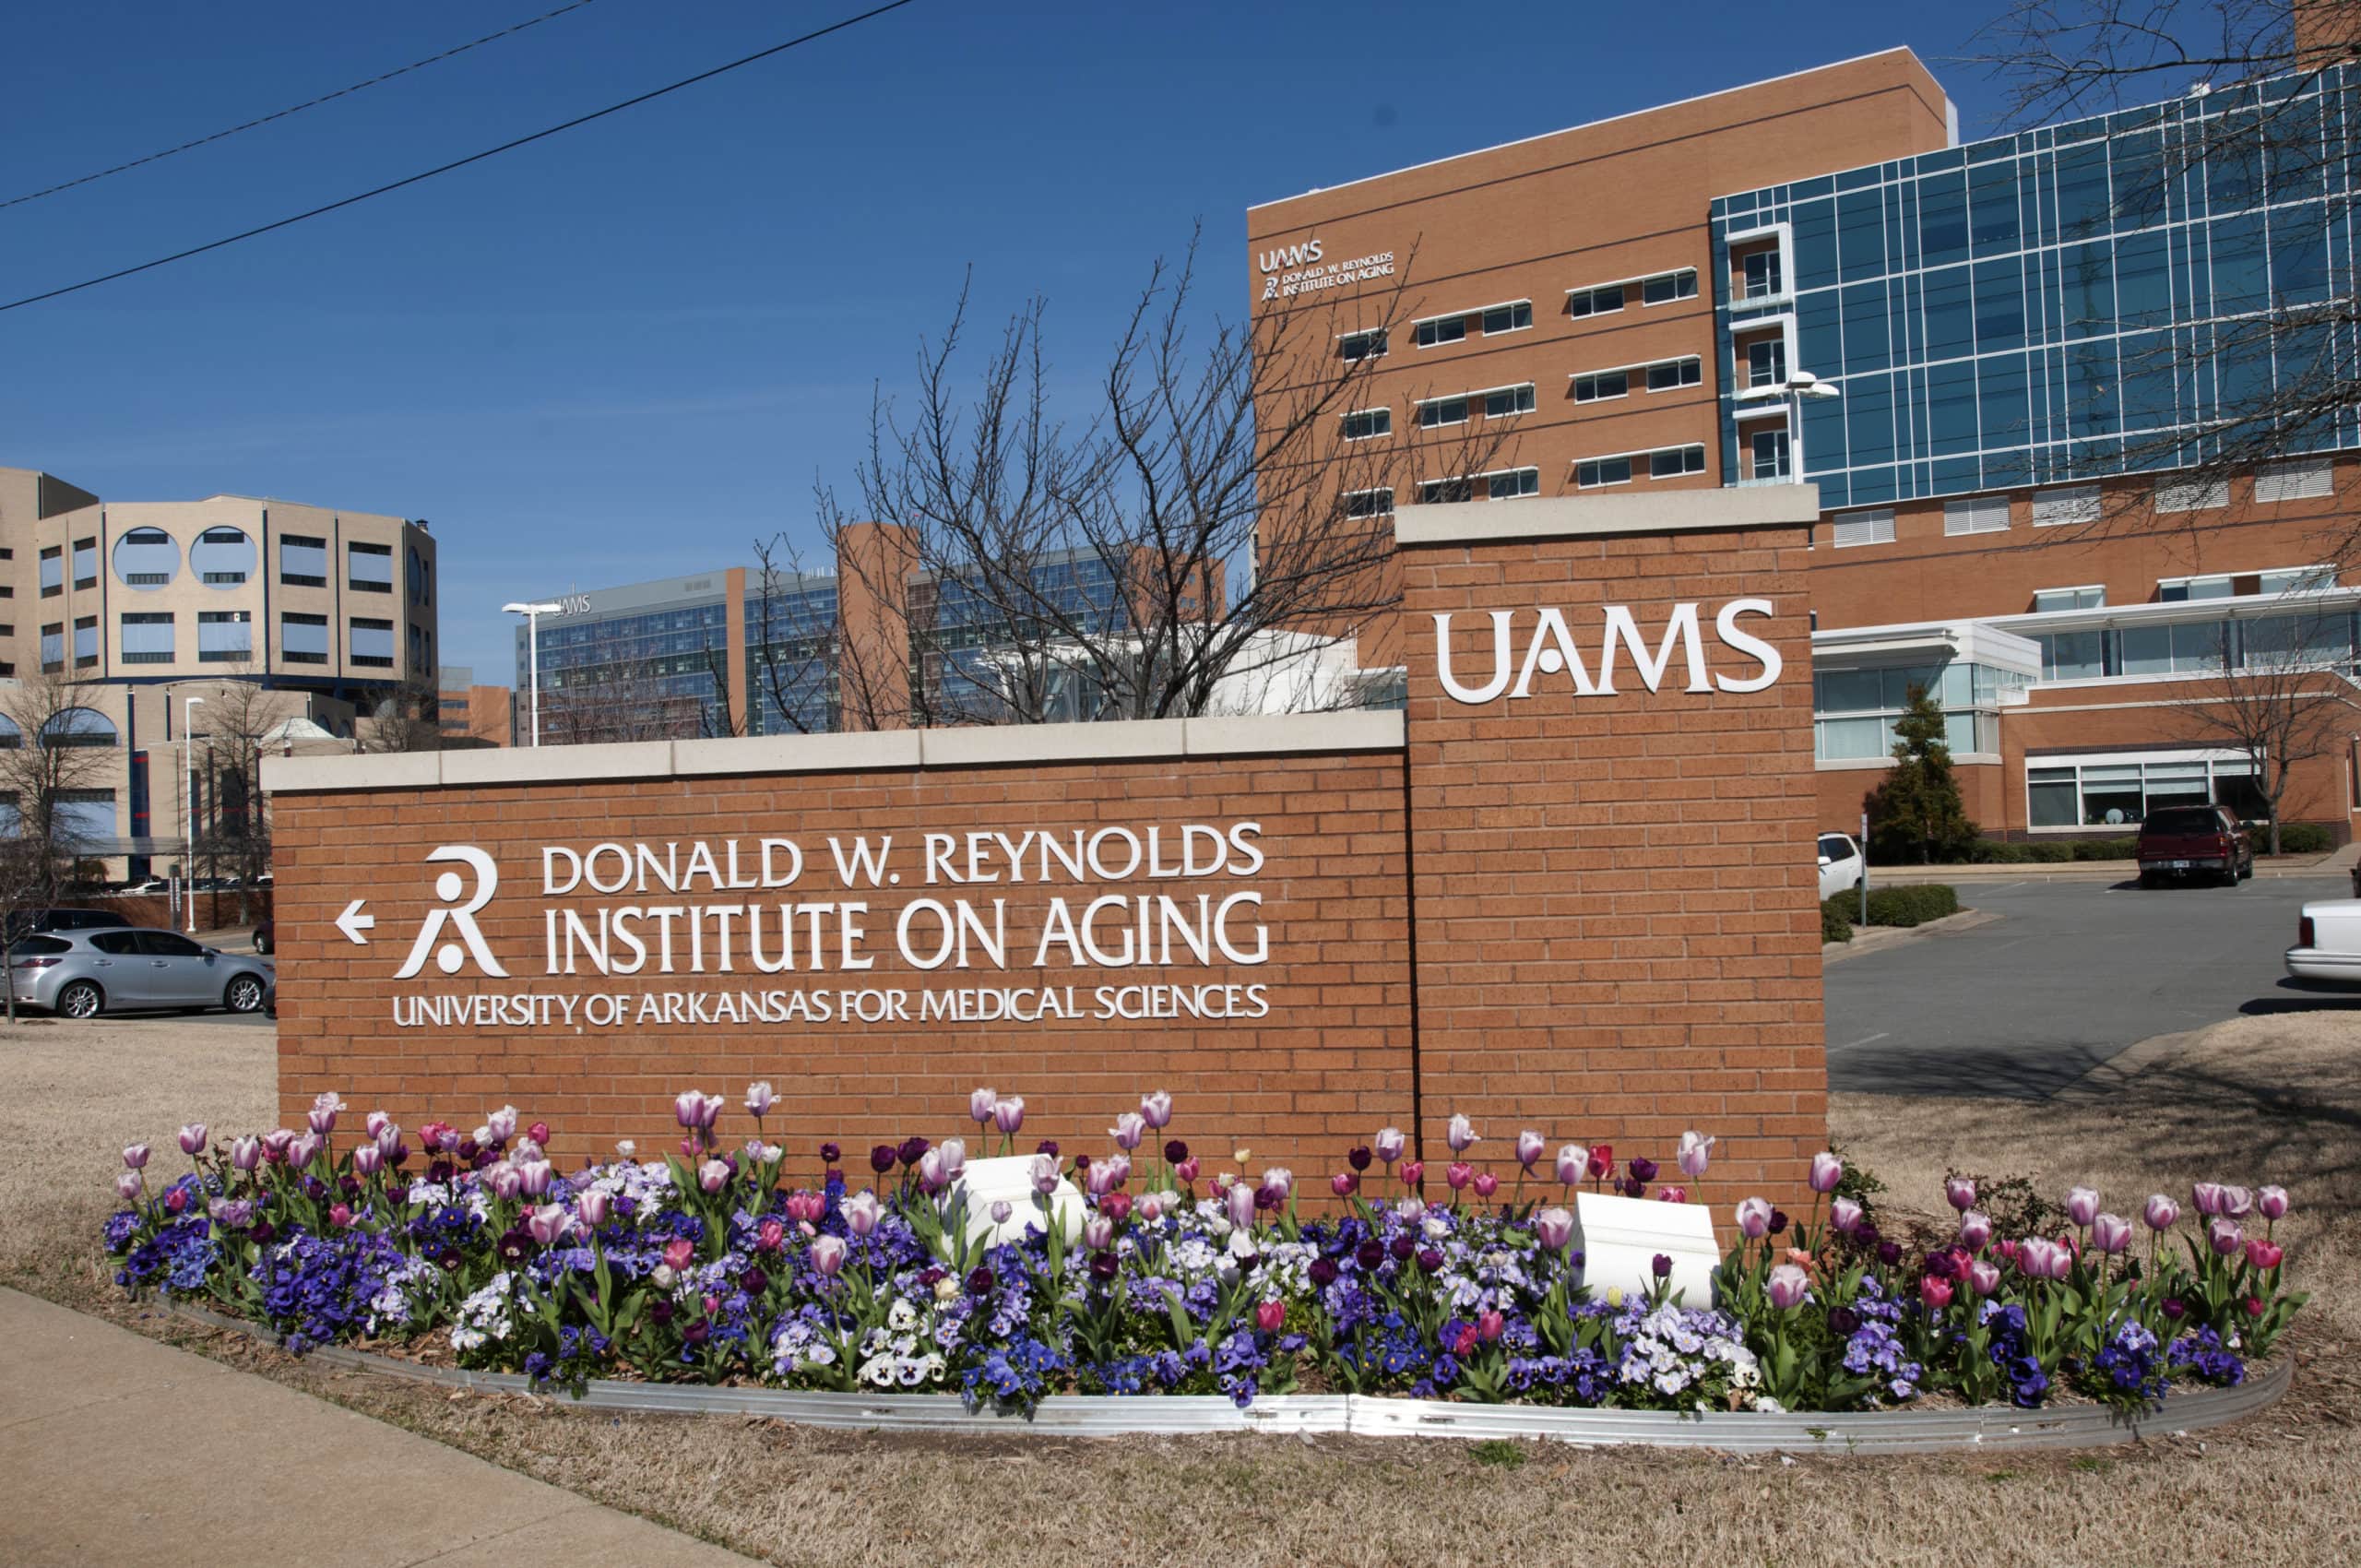 The UAMS Thomas and Lyon Longevity Clinic, part of the Donald W. Reynolds Institute on Aging, has attained Level I Certification as an Age-Friendly Health System, a designation provided by the Institute for Healthcare Improvement (IHI) and The John A. Hartford Foundation.